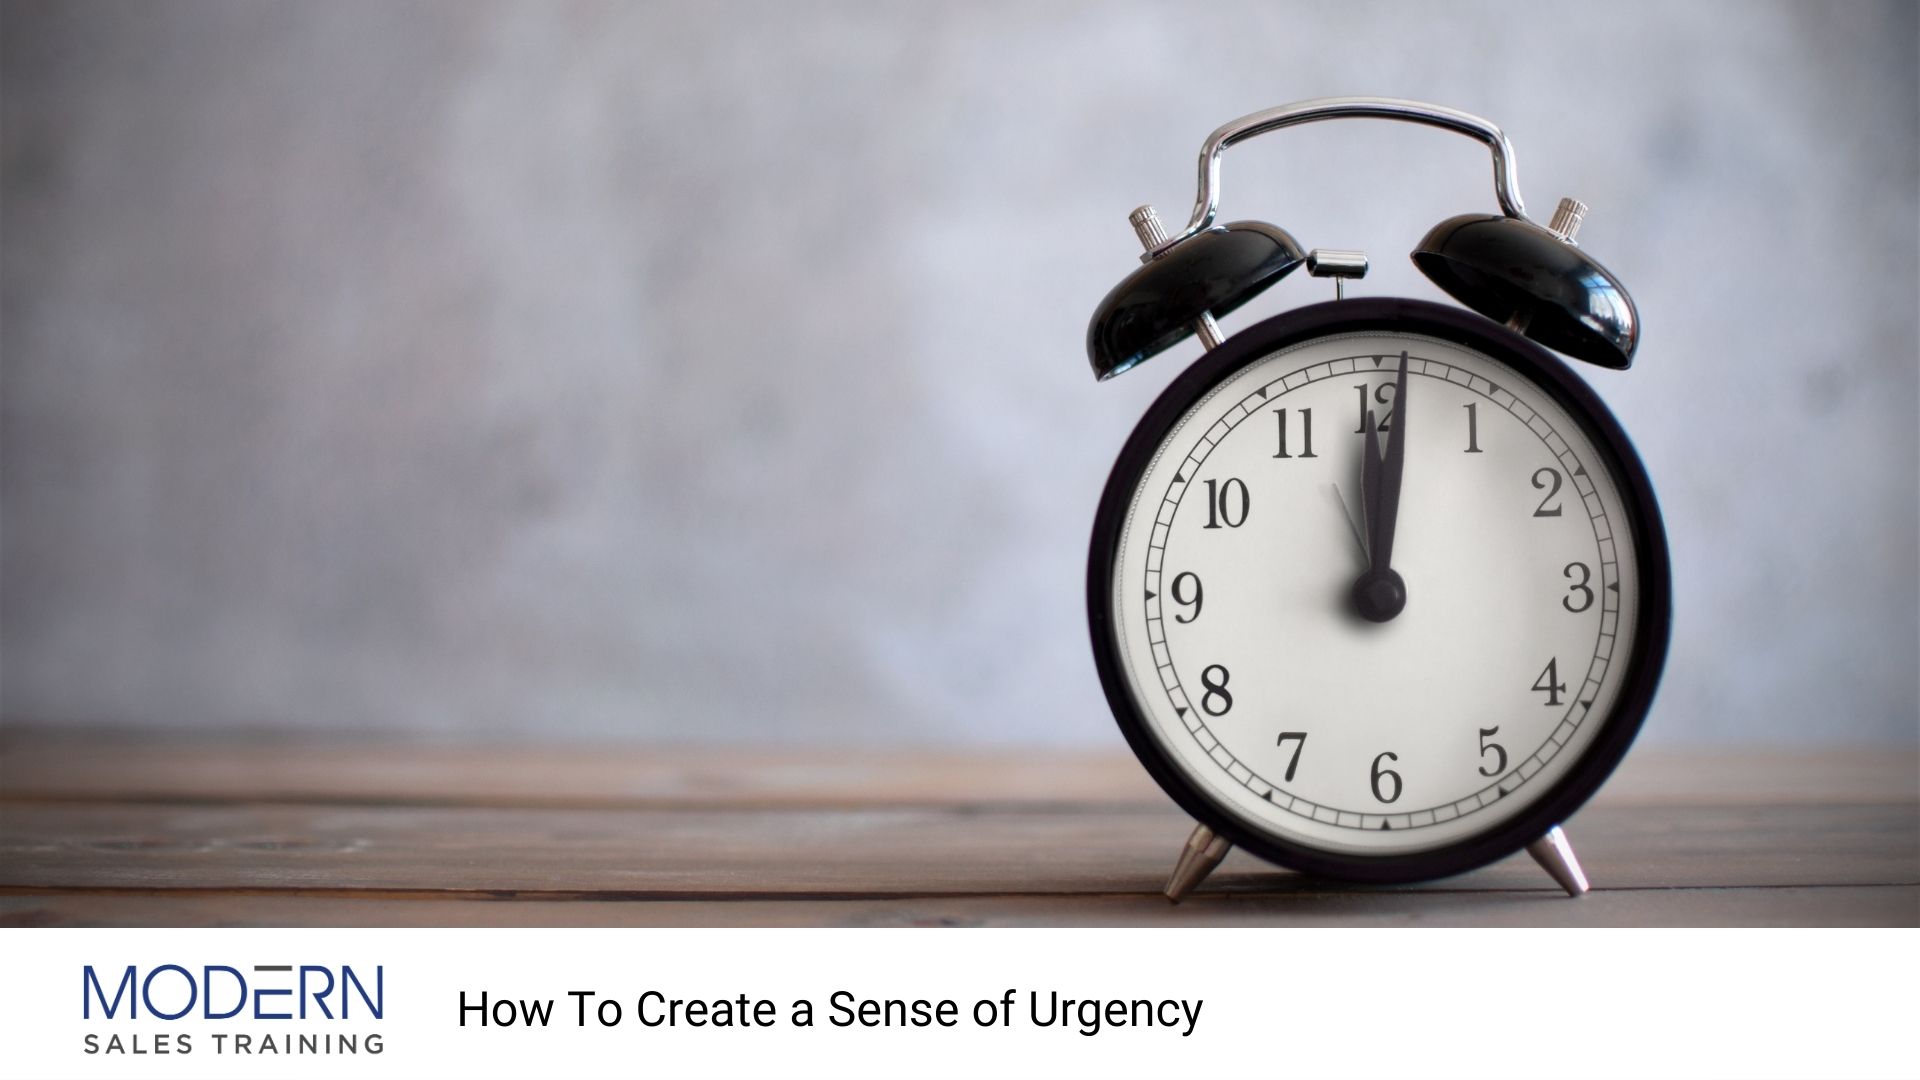 How-To-Create-A-Sense-of-Urgency-Sales-Training-Course-Modern-Sales-Training